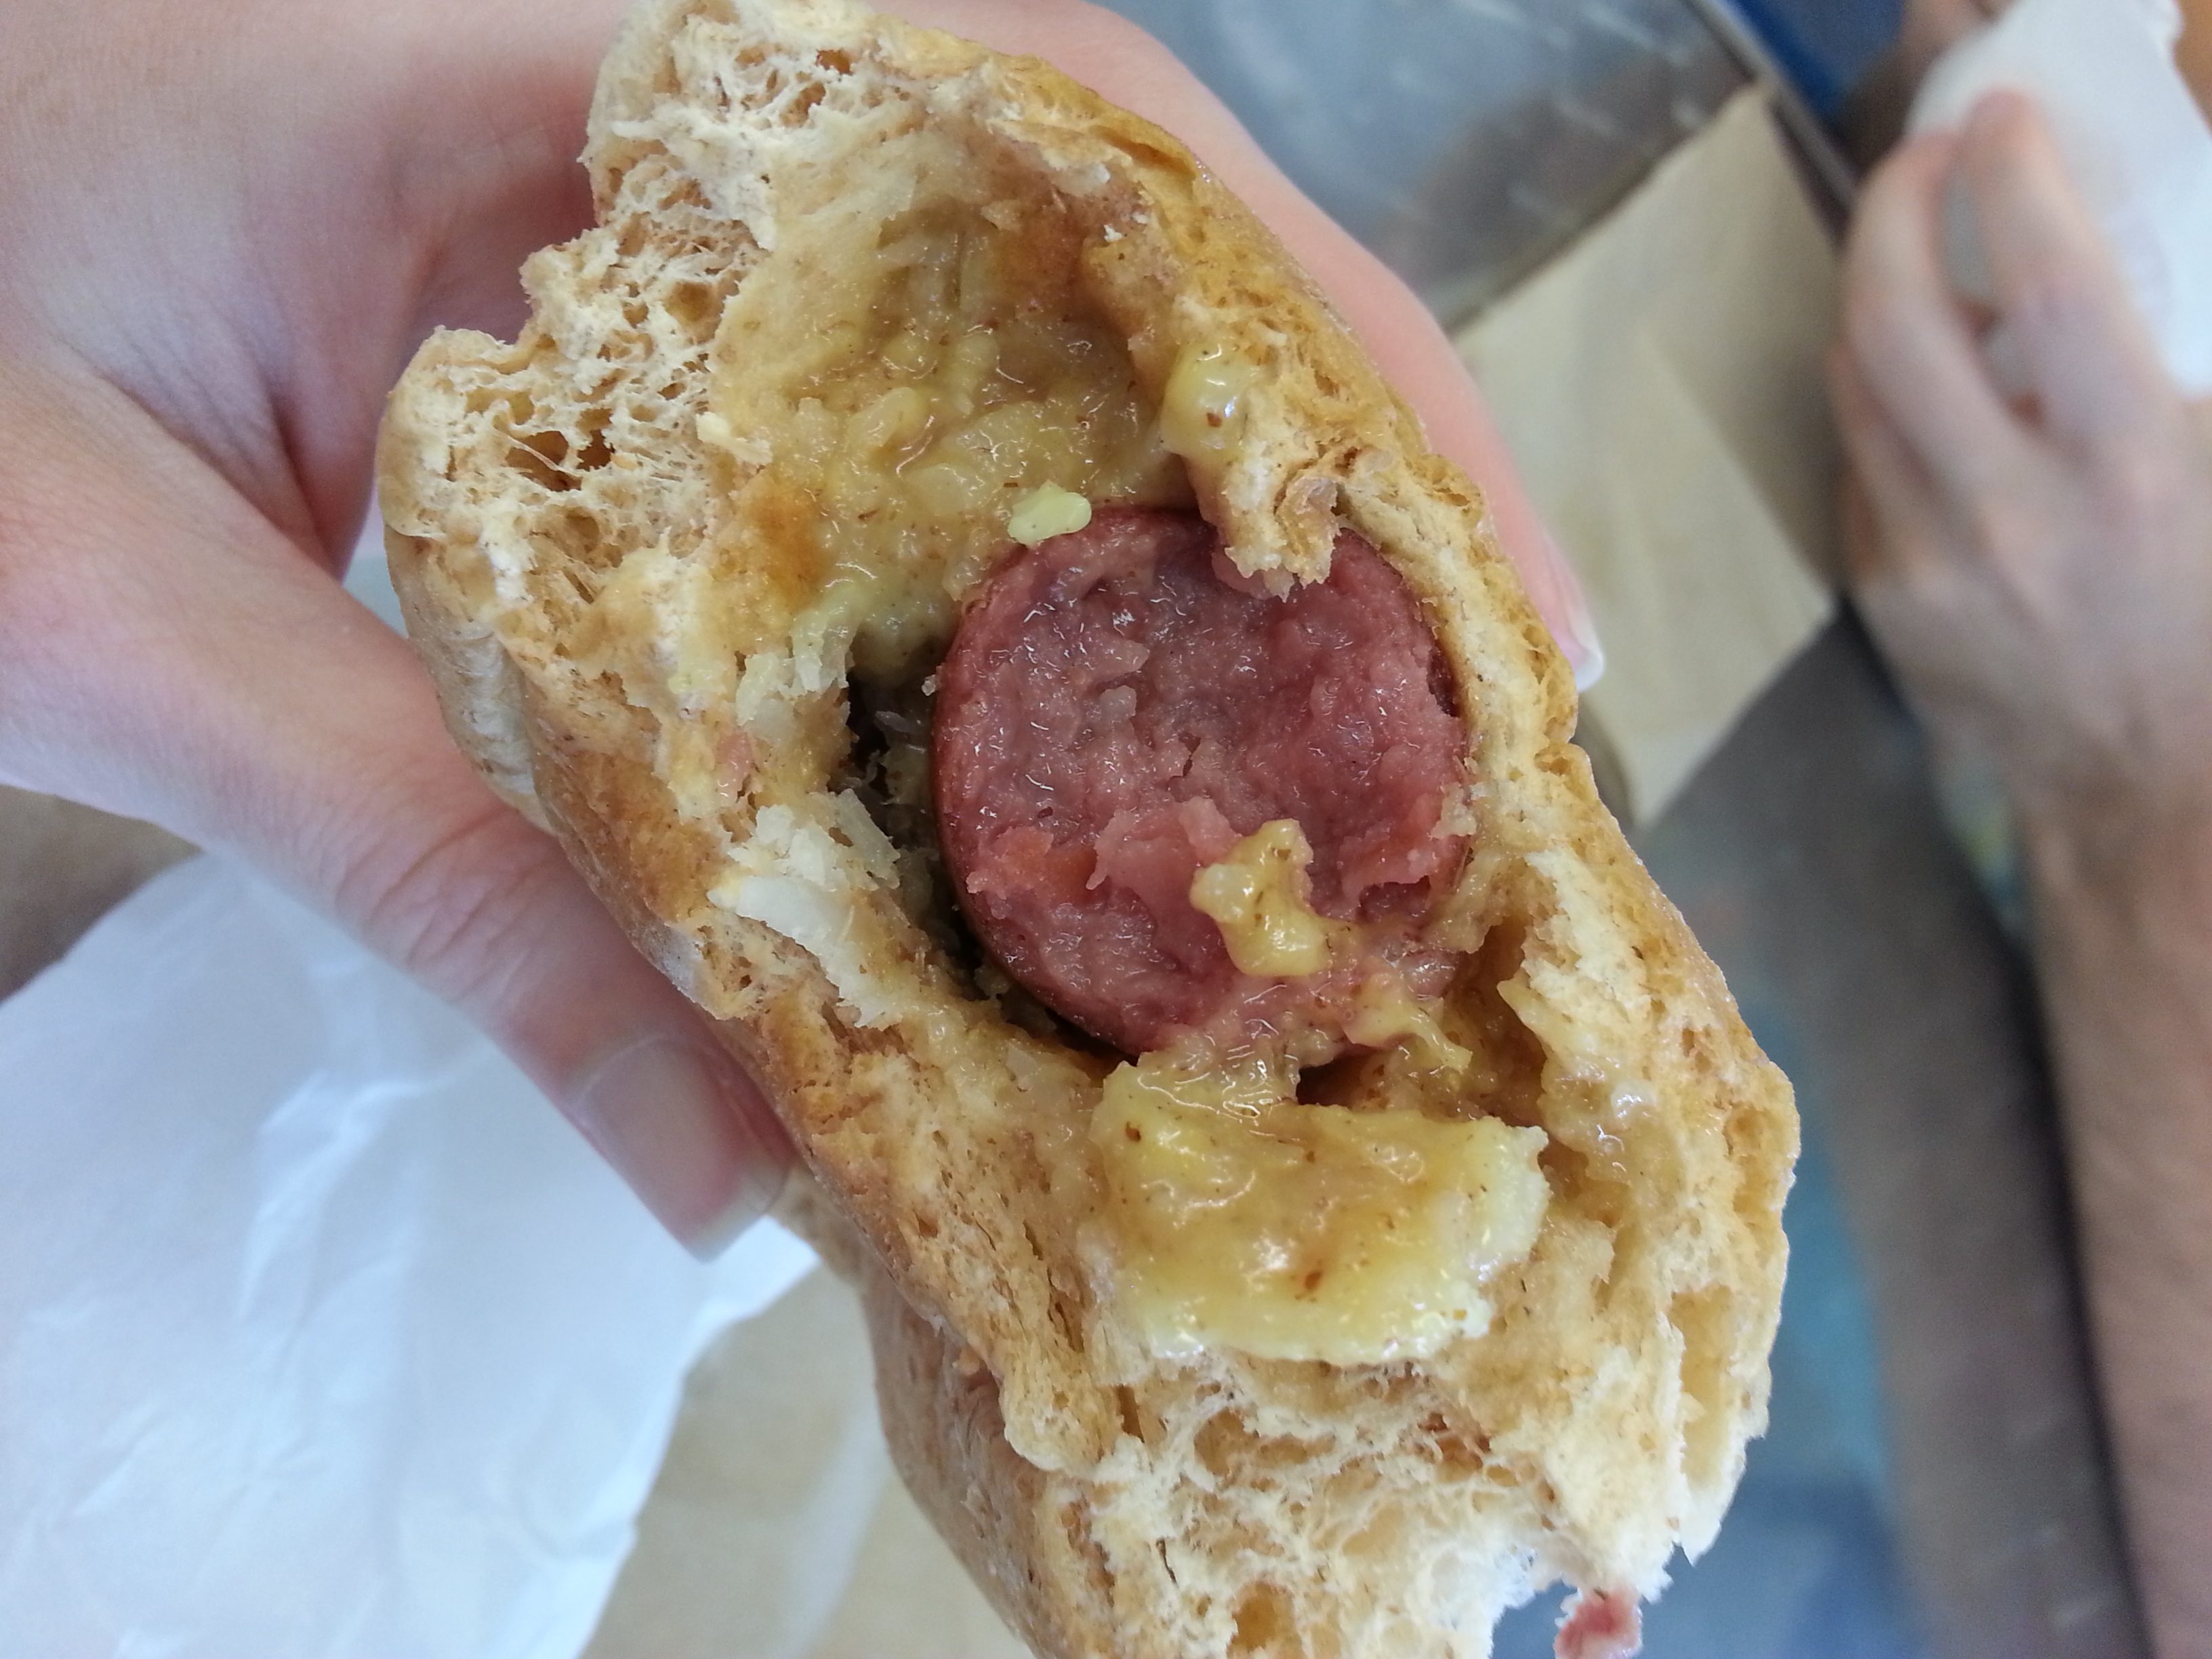 Hand holding a hot dog encased in a roll.